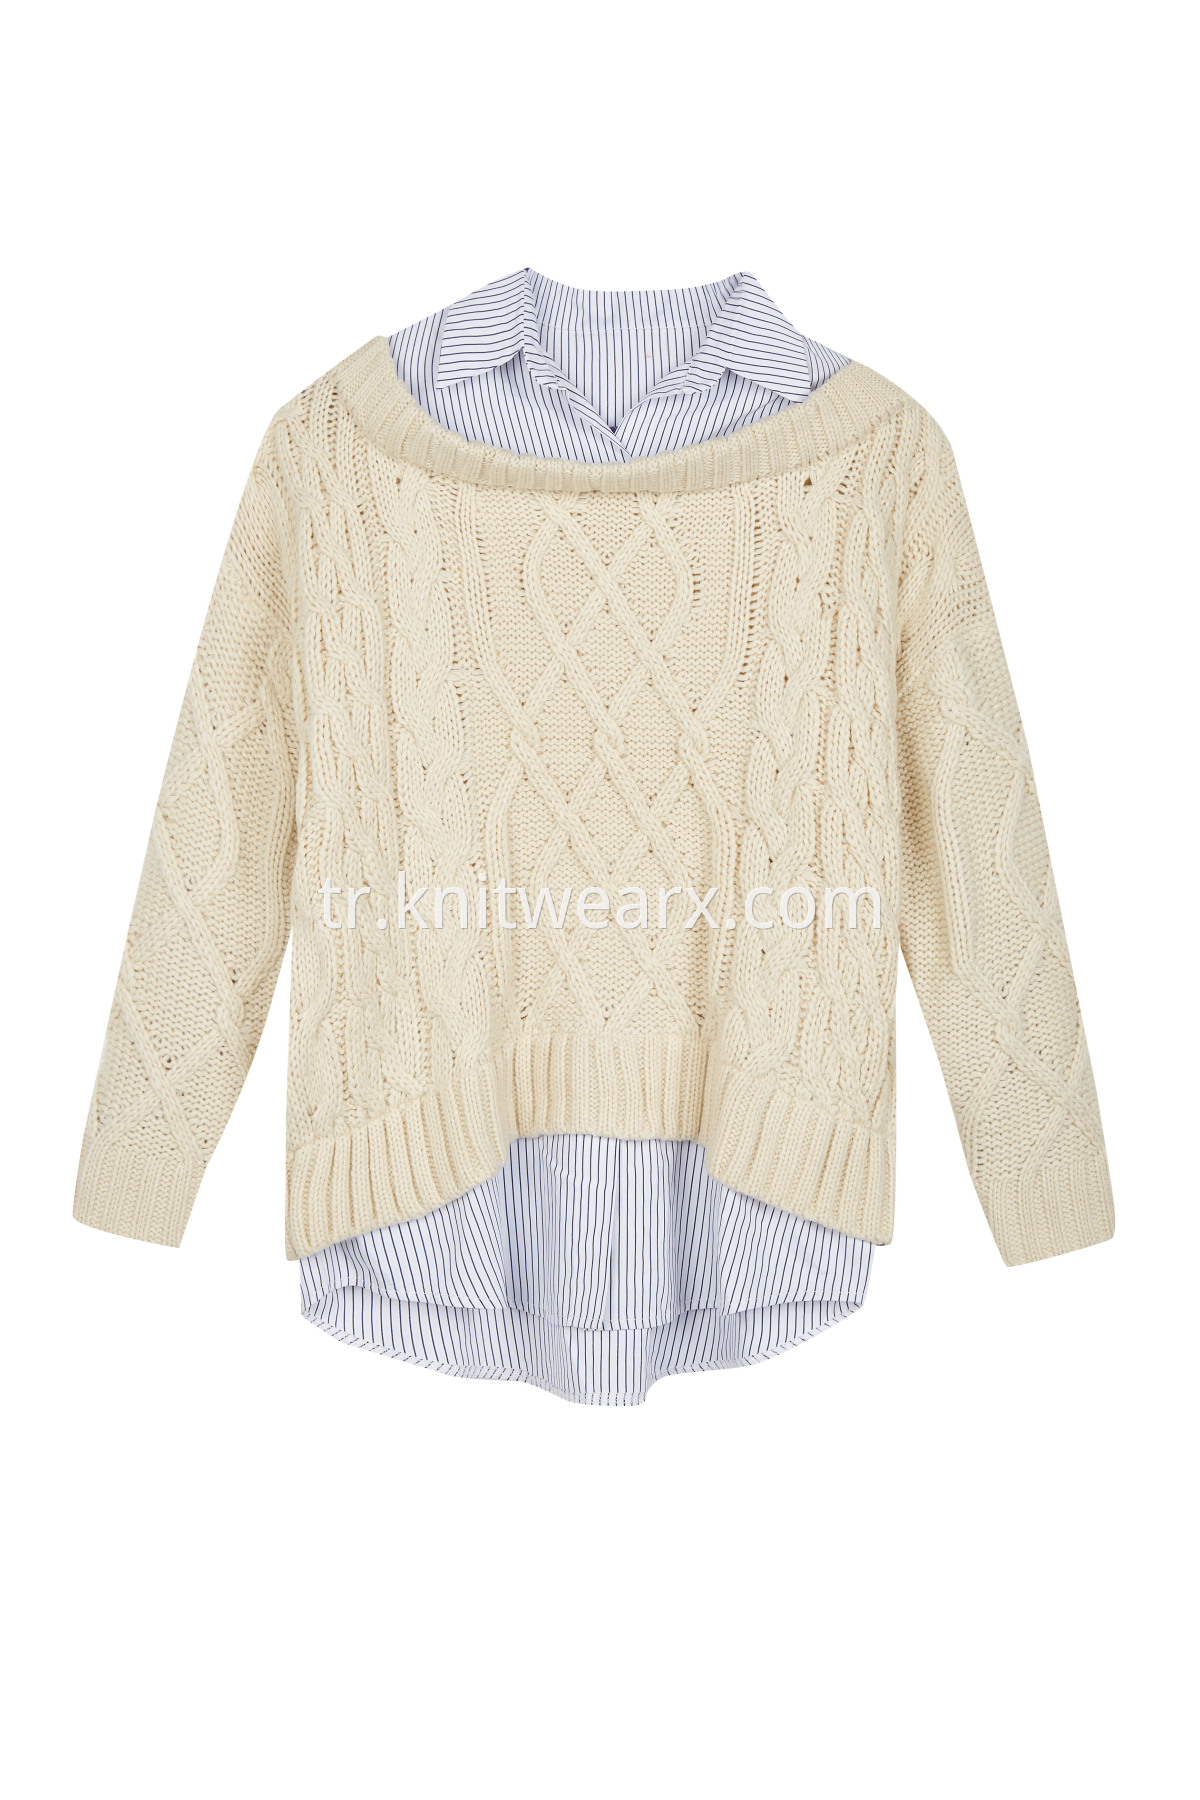 Women's Knit and Woven Casual Shirt Collar Cable Knitwear